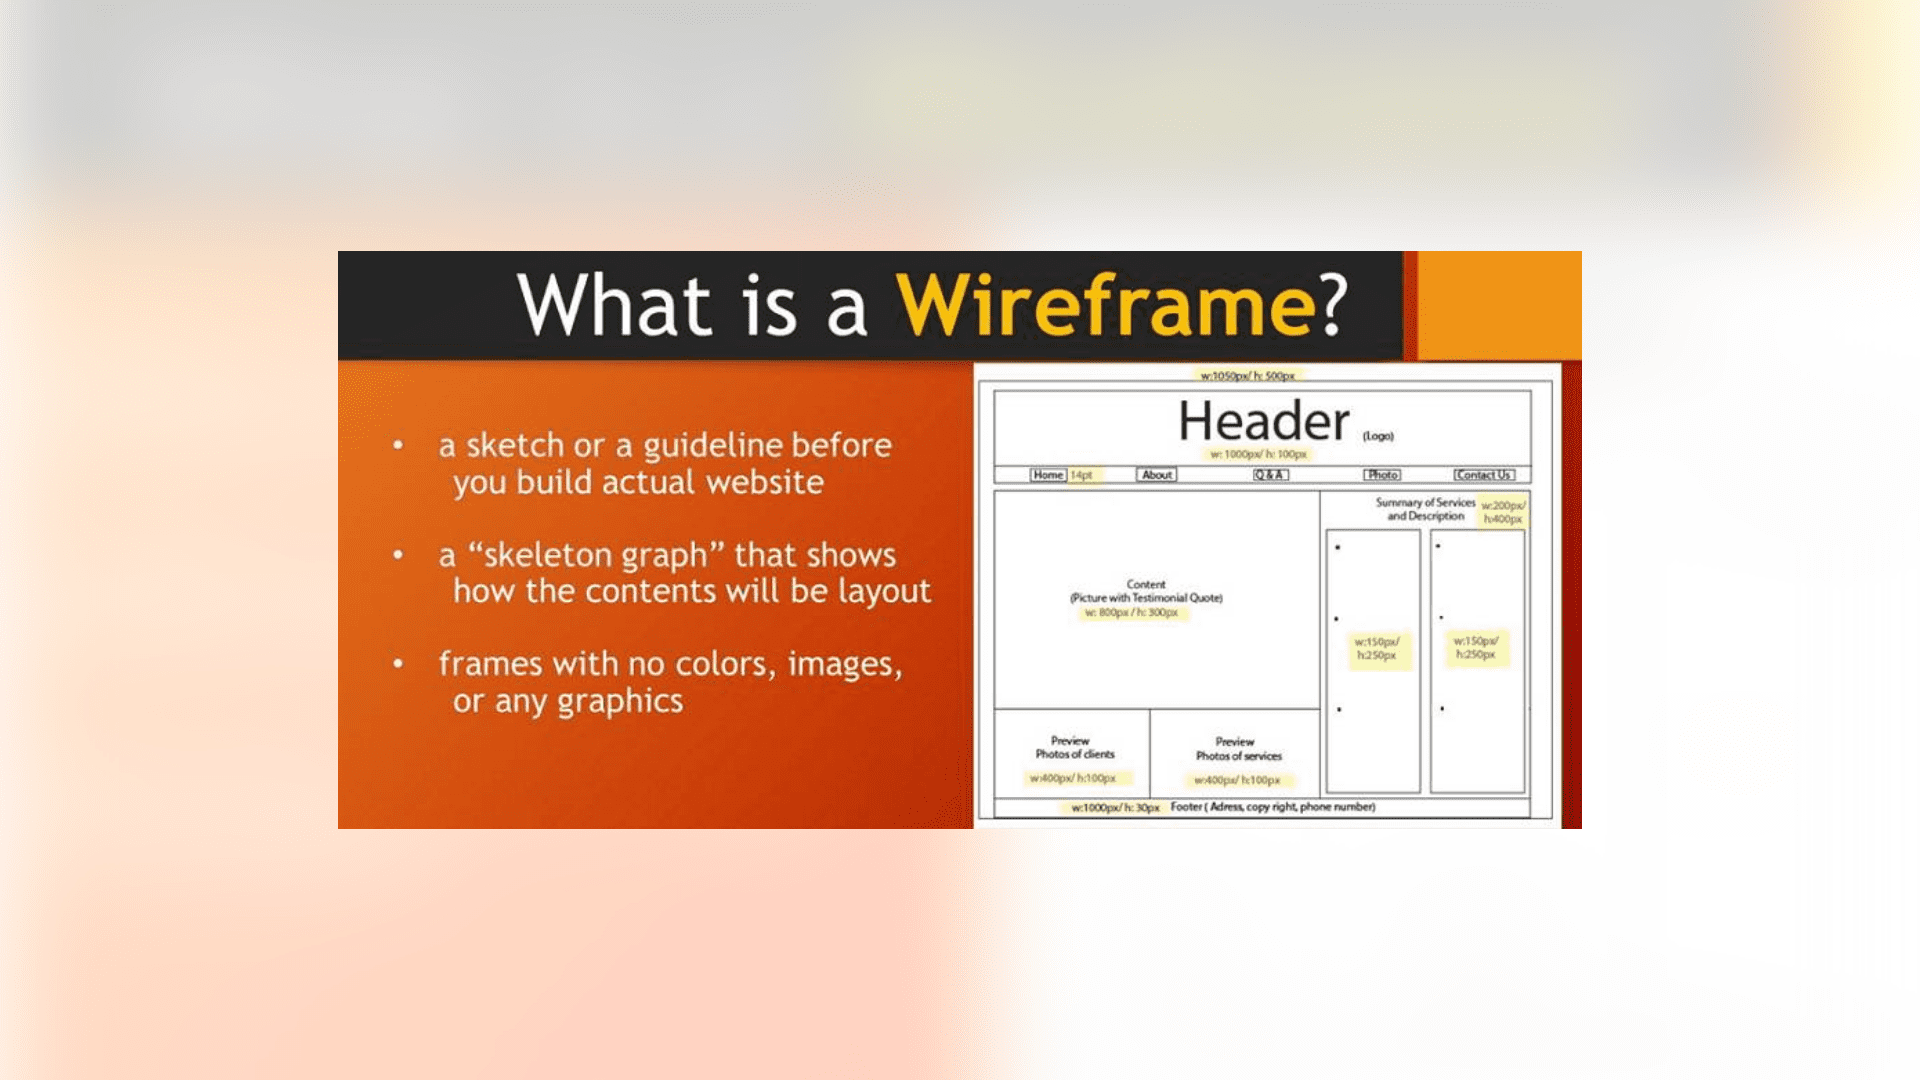 what is wireframe?